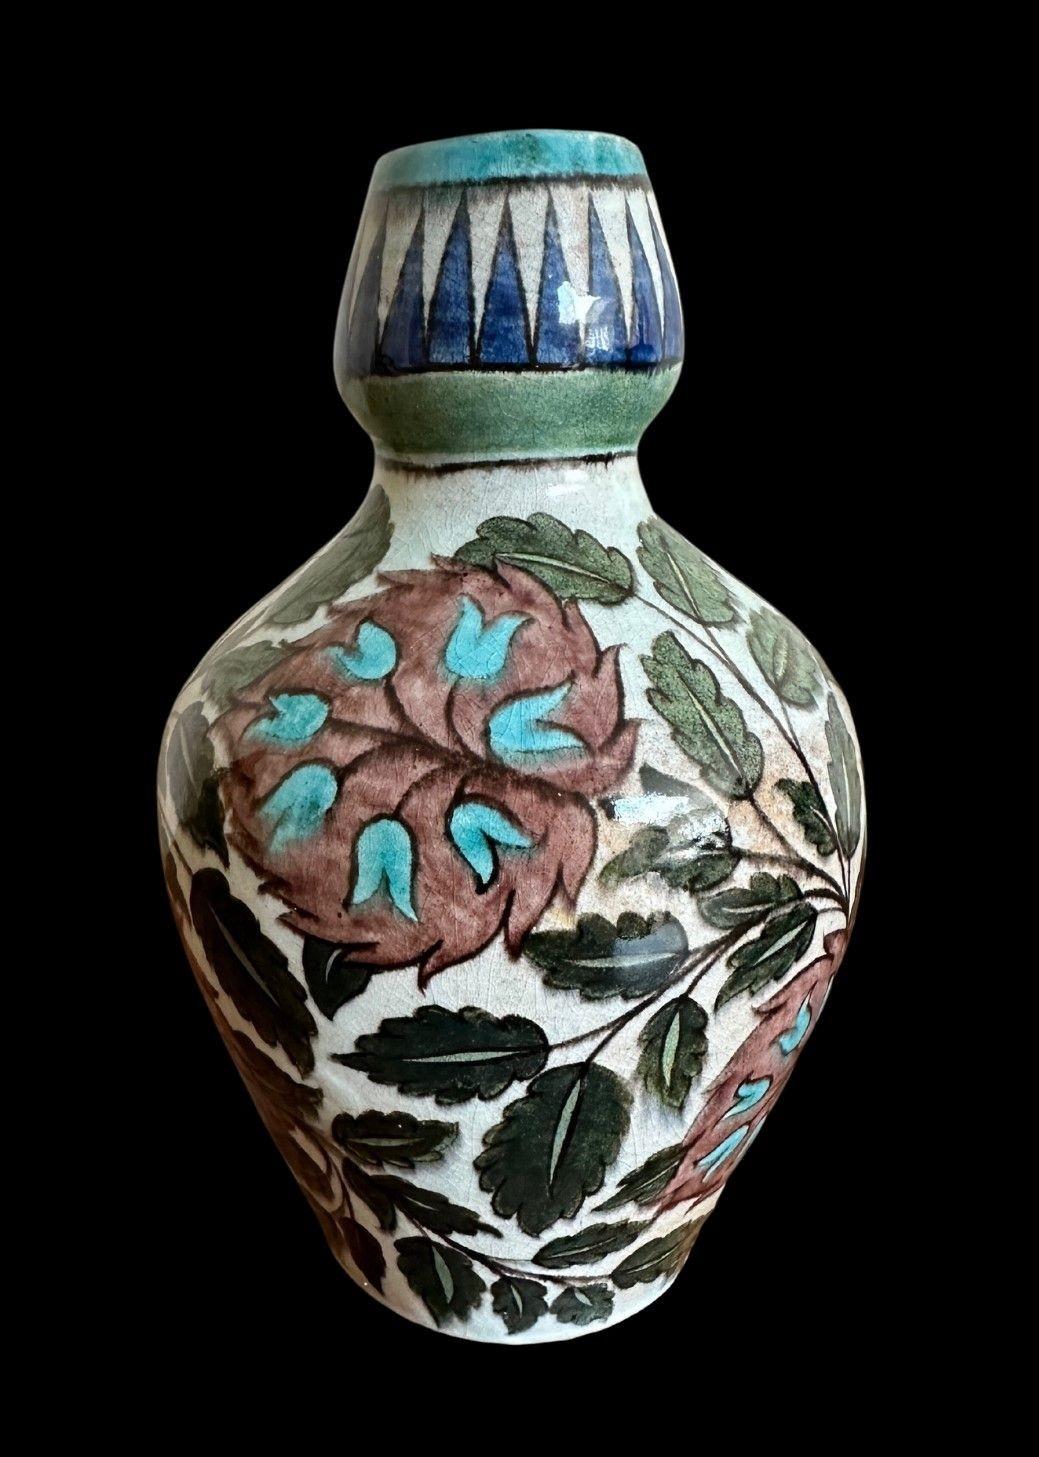 5389
William De Morgan Polychrome Jug decorated with Flowers and Foliage in the Persian Palate
Invisible restoration to cracks
23.5cm high
circa 1890.